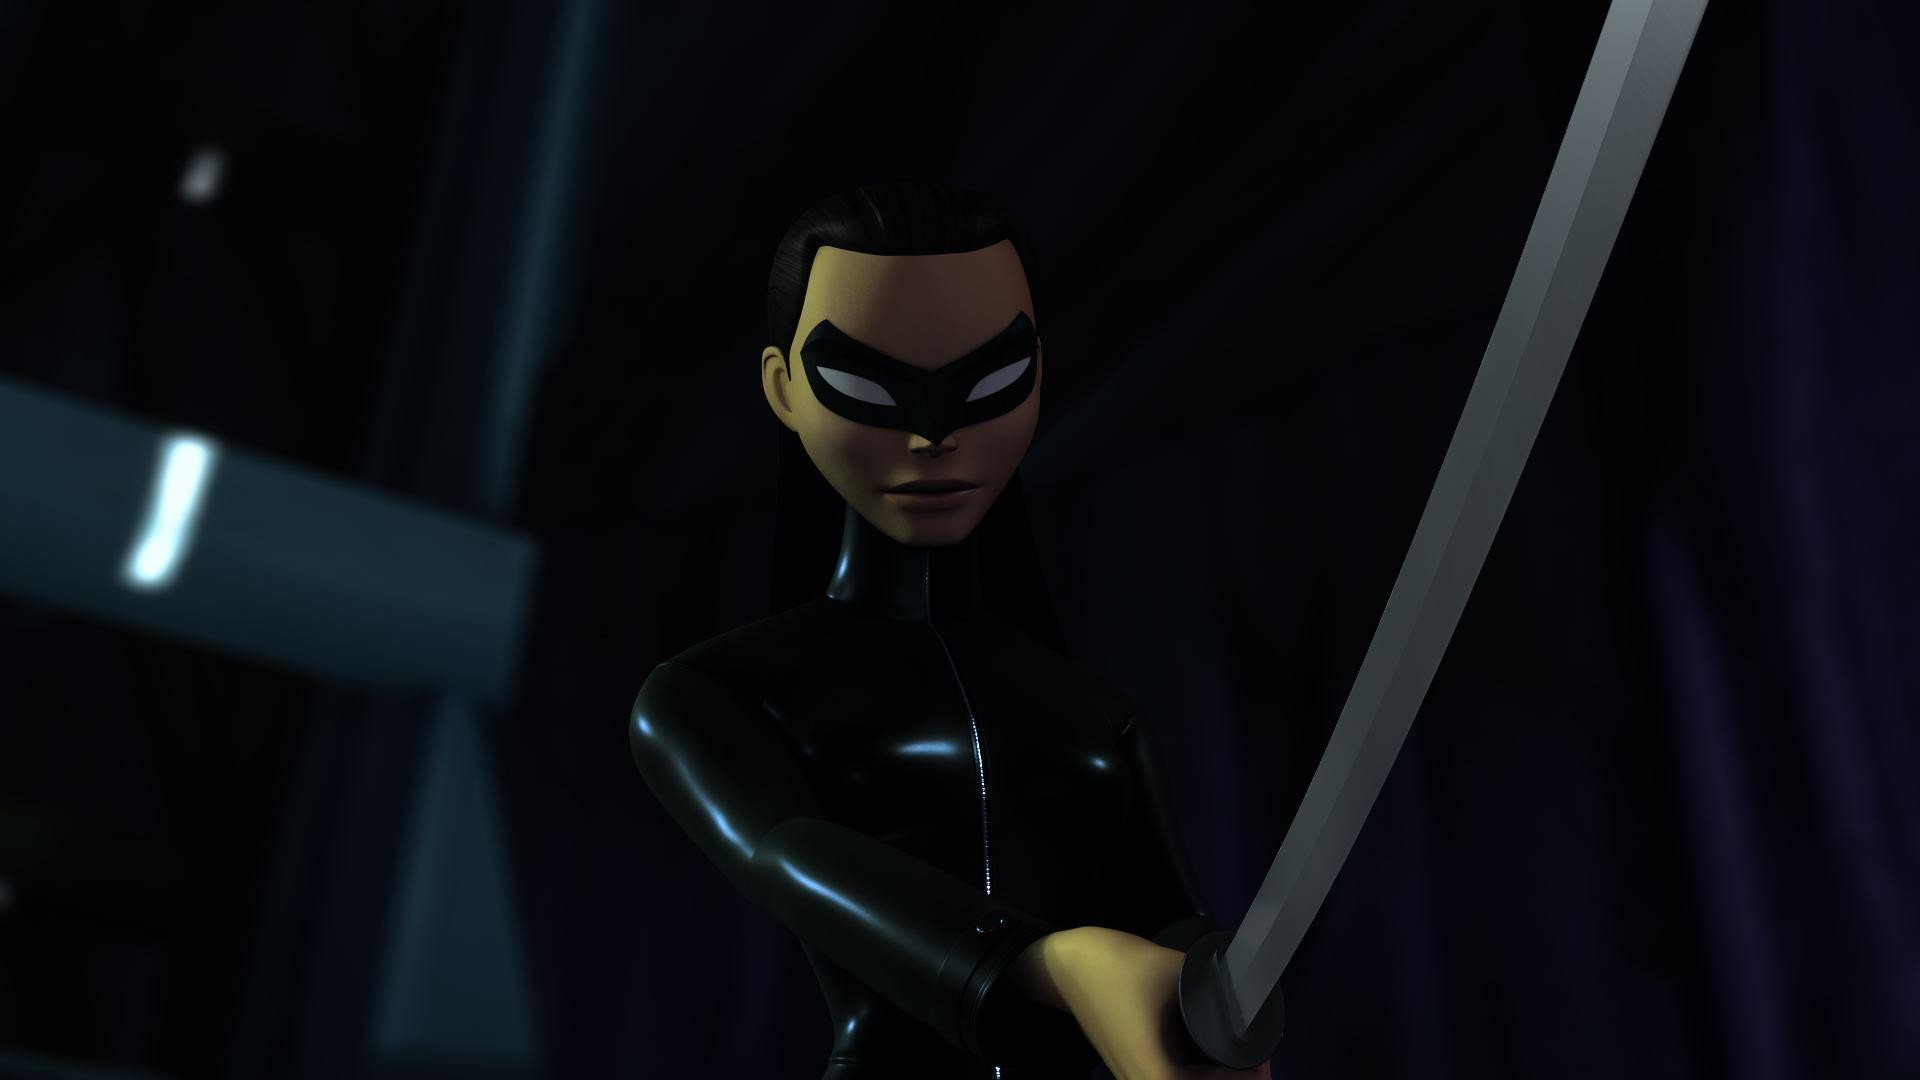 1920x1080 Promo Clips And Images For BEWARE THE BATMAN & TEEN TITANS GO! [